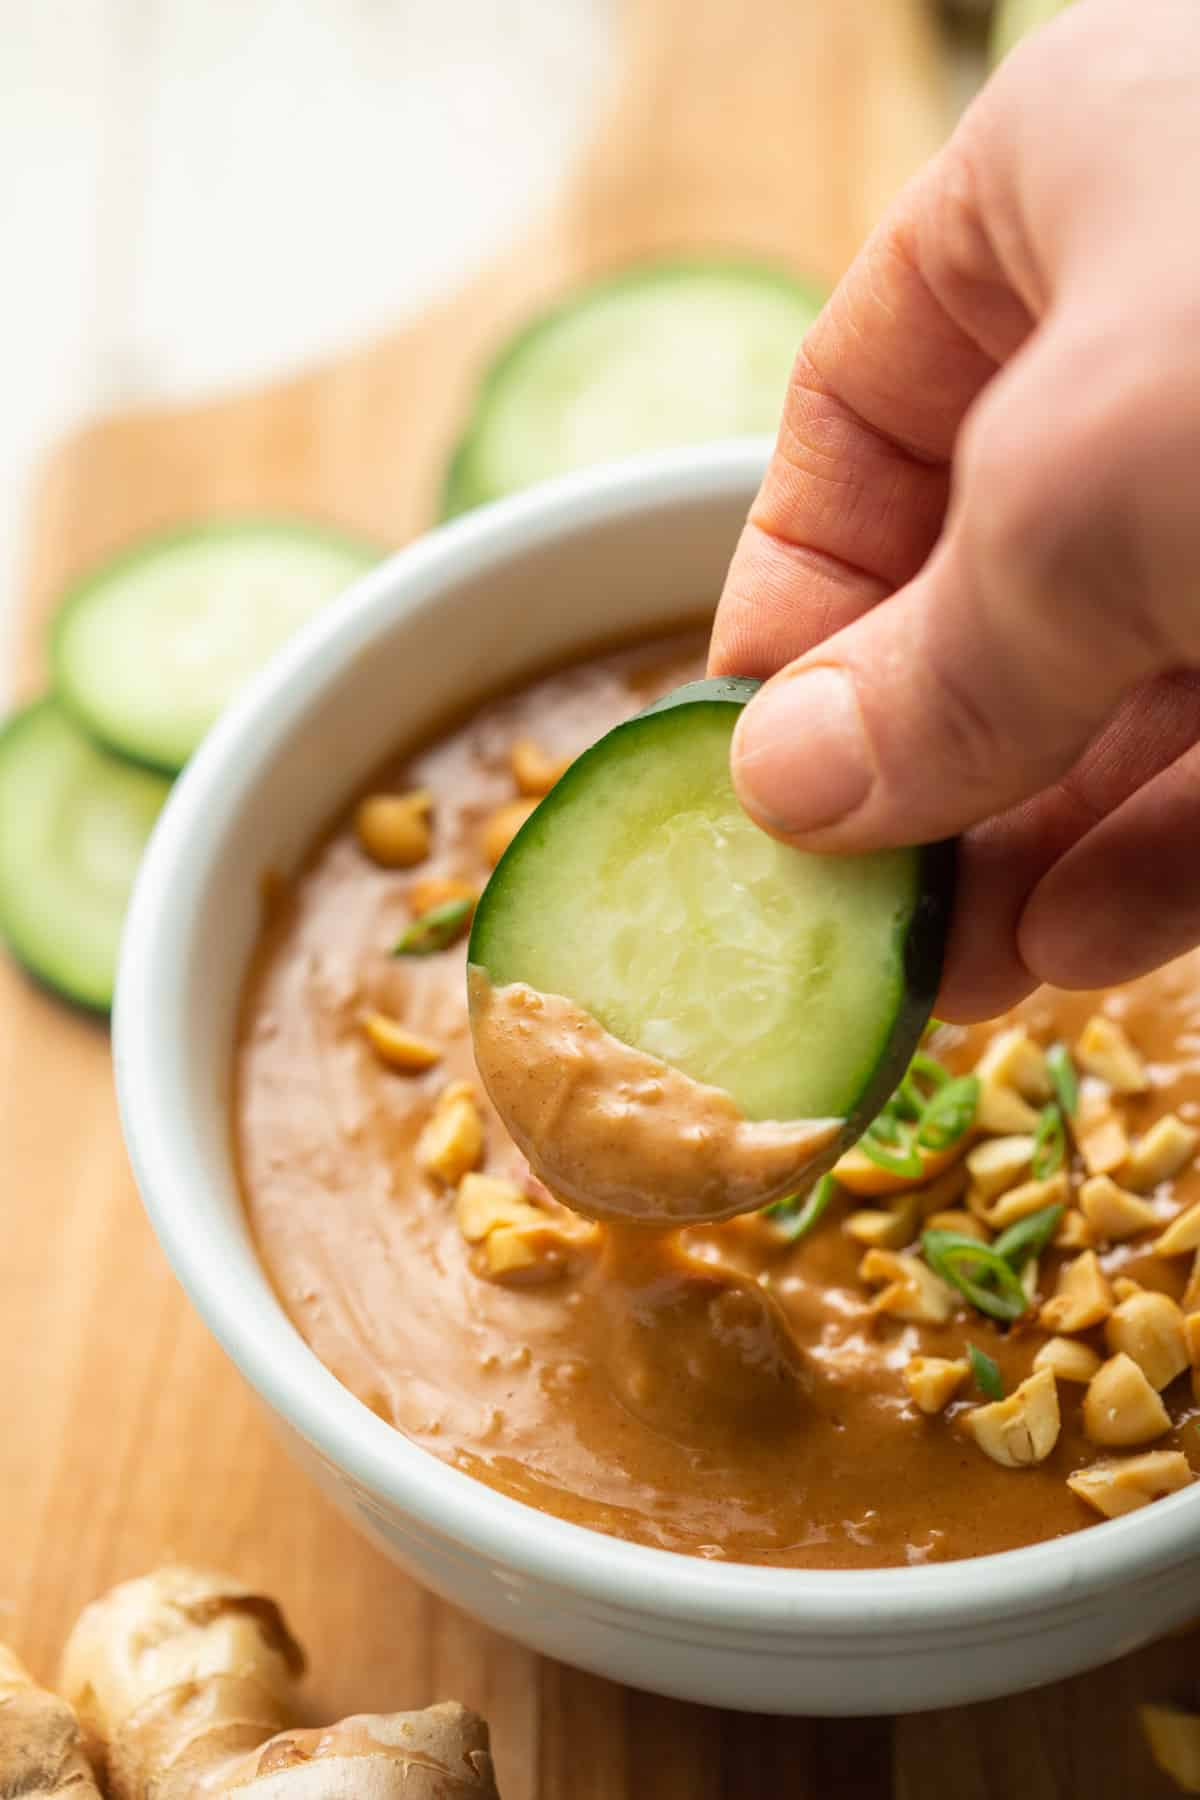 Hand dipping a cucumber slice into a bowl of Vegan Peanut Sauce.